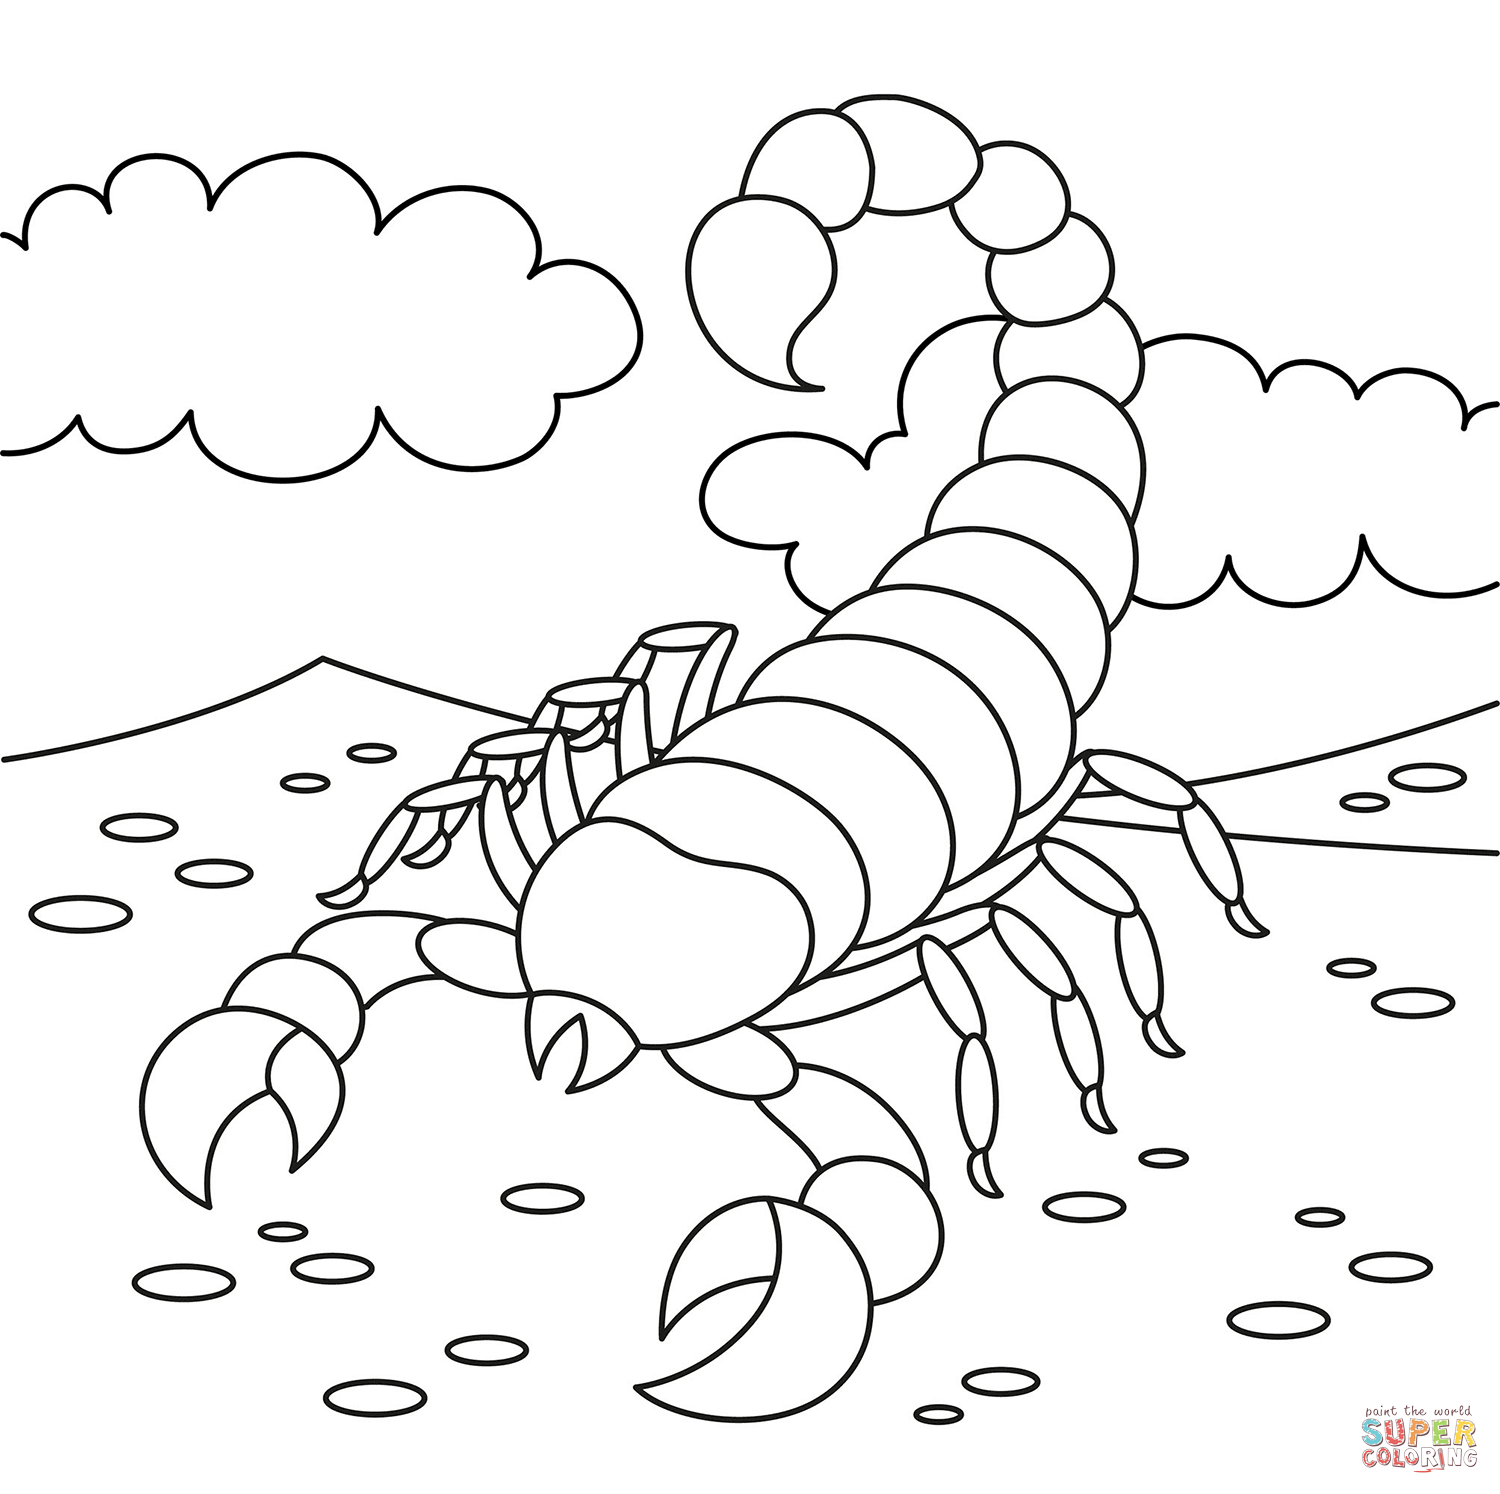 Scorpion coloring page free printable coloring pages